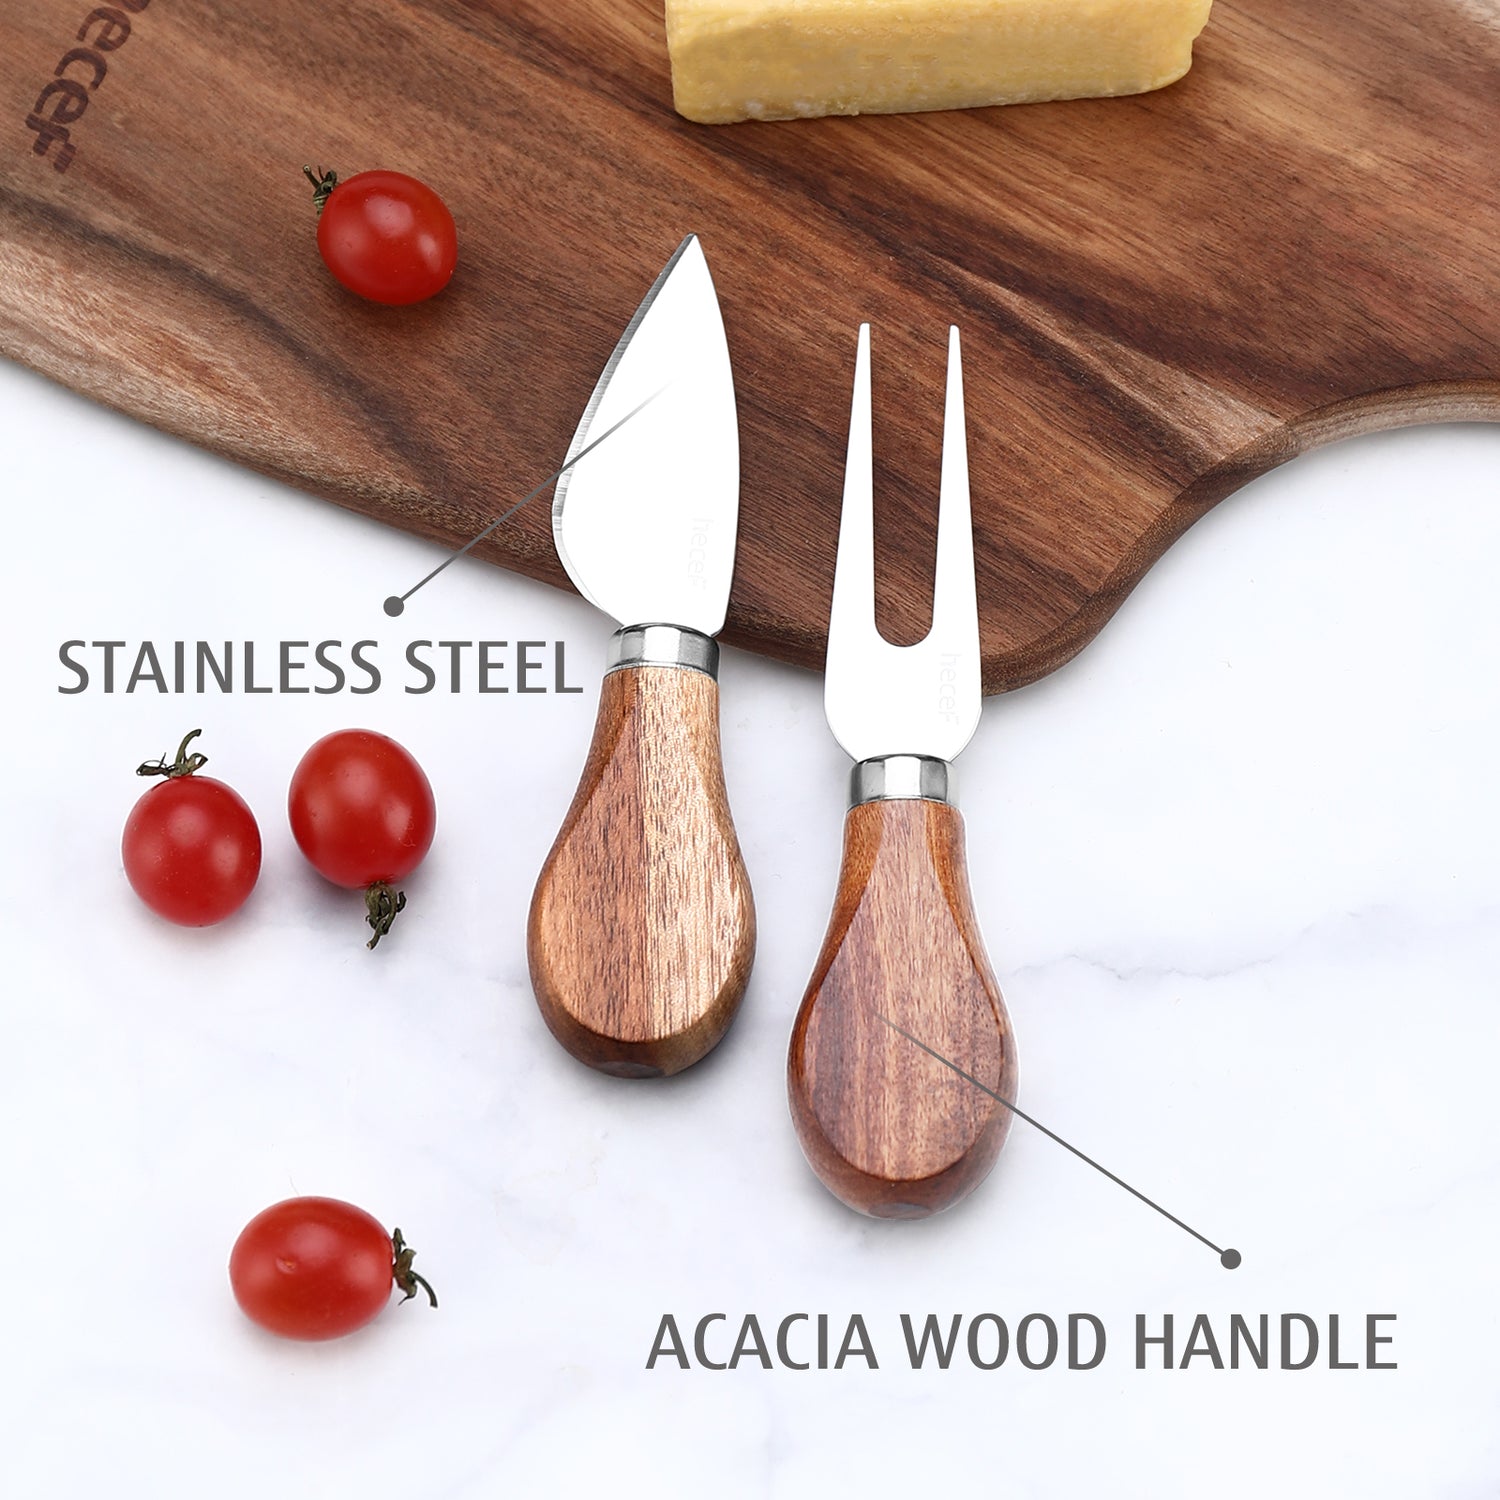 Hecef Acacia Wooden Cheese Board Gift Set with Cheese Knife & Fork - Hecef Kitchen